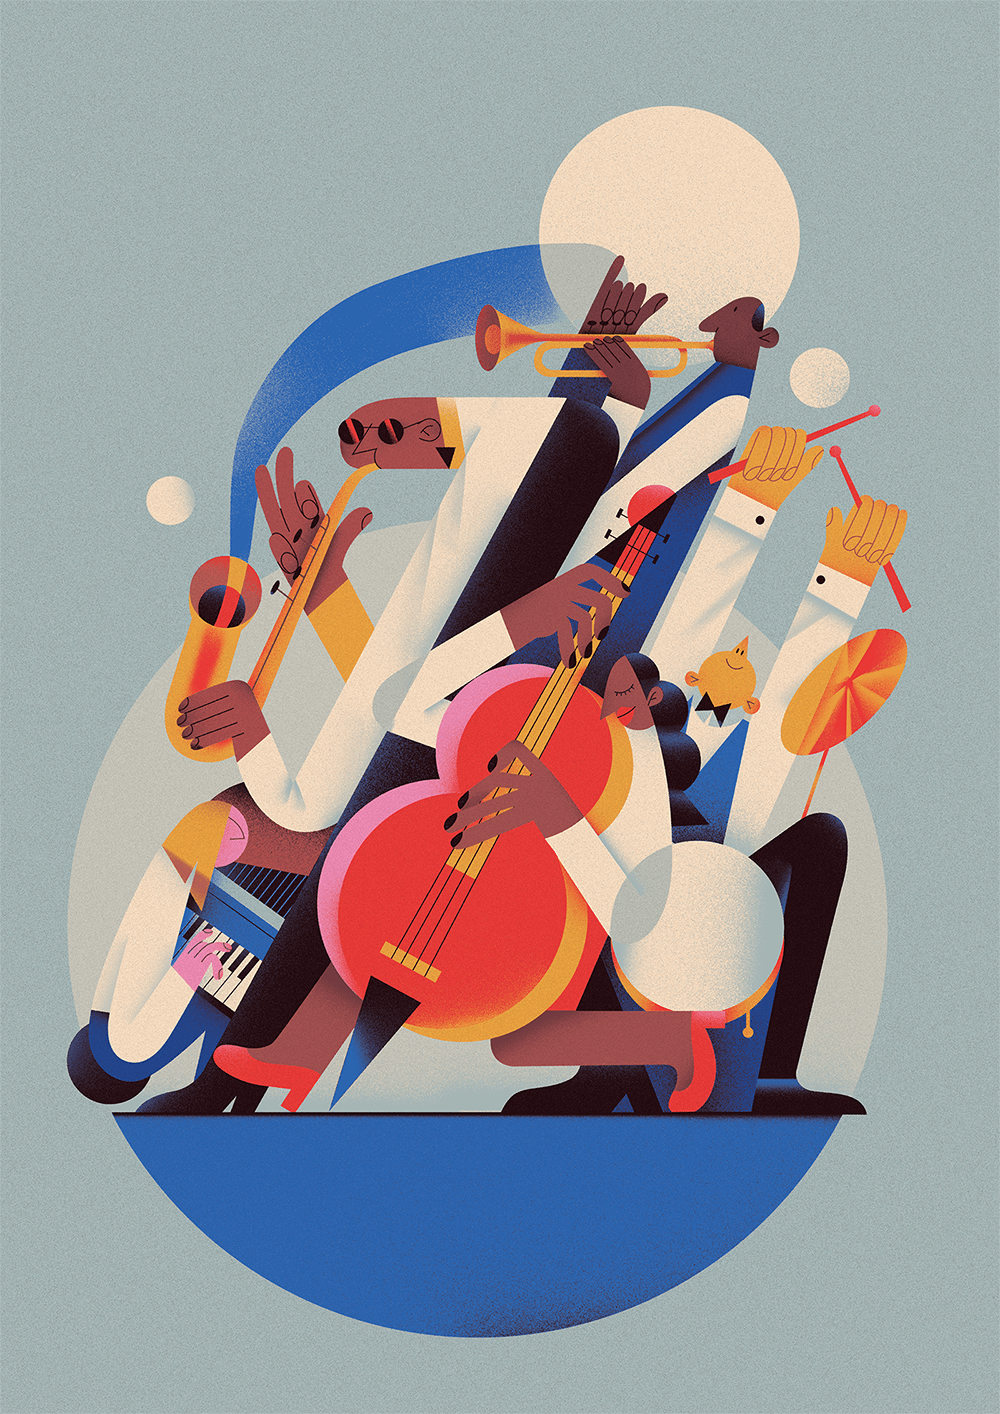 jazz trumpet music star goal Editorial Illustration conceptual Character design  band